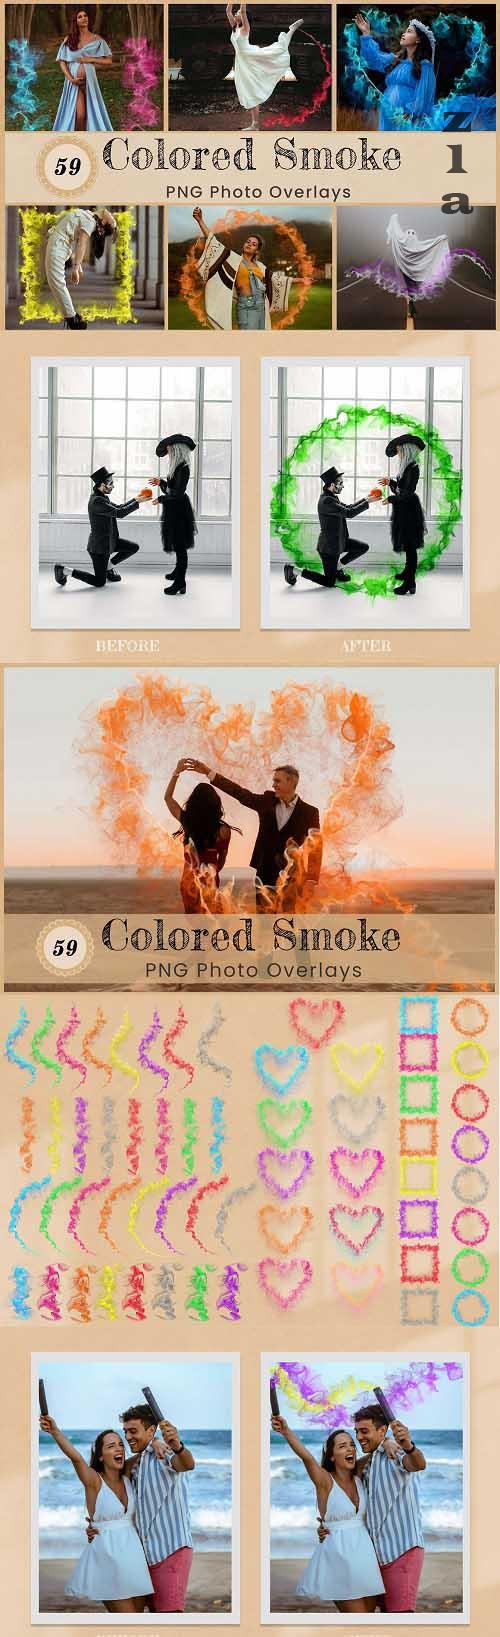 Colored Smoke PNG Overlays Backdrops - 6589313